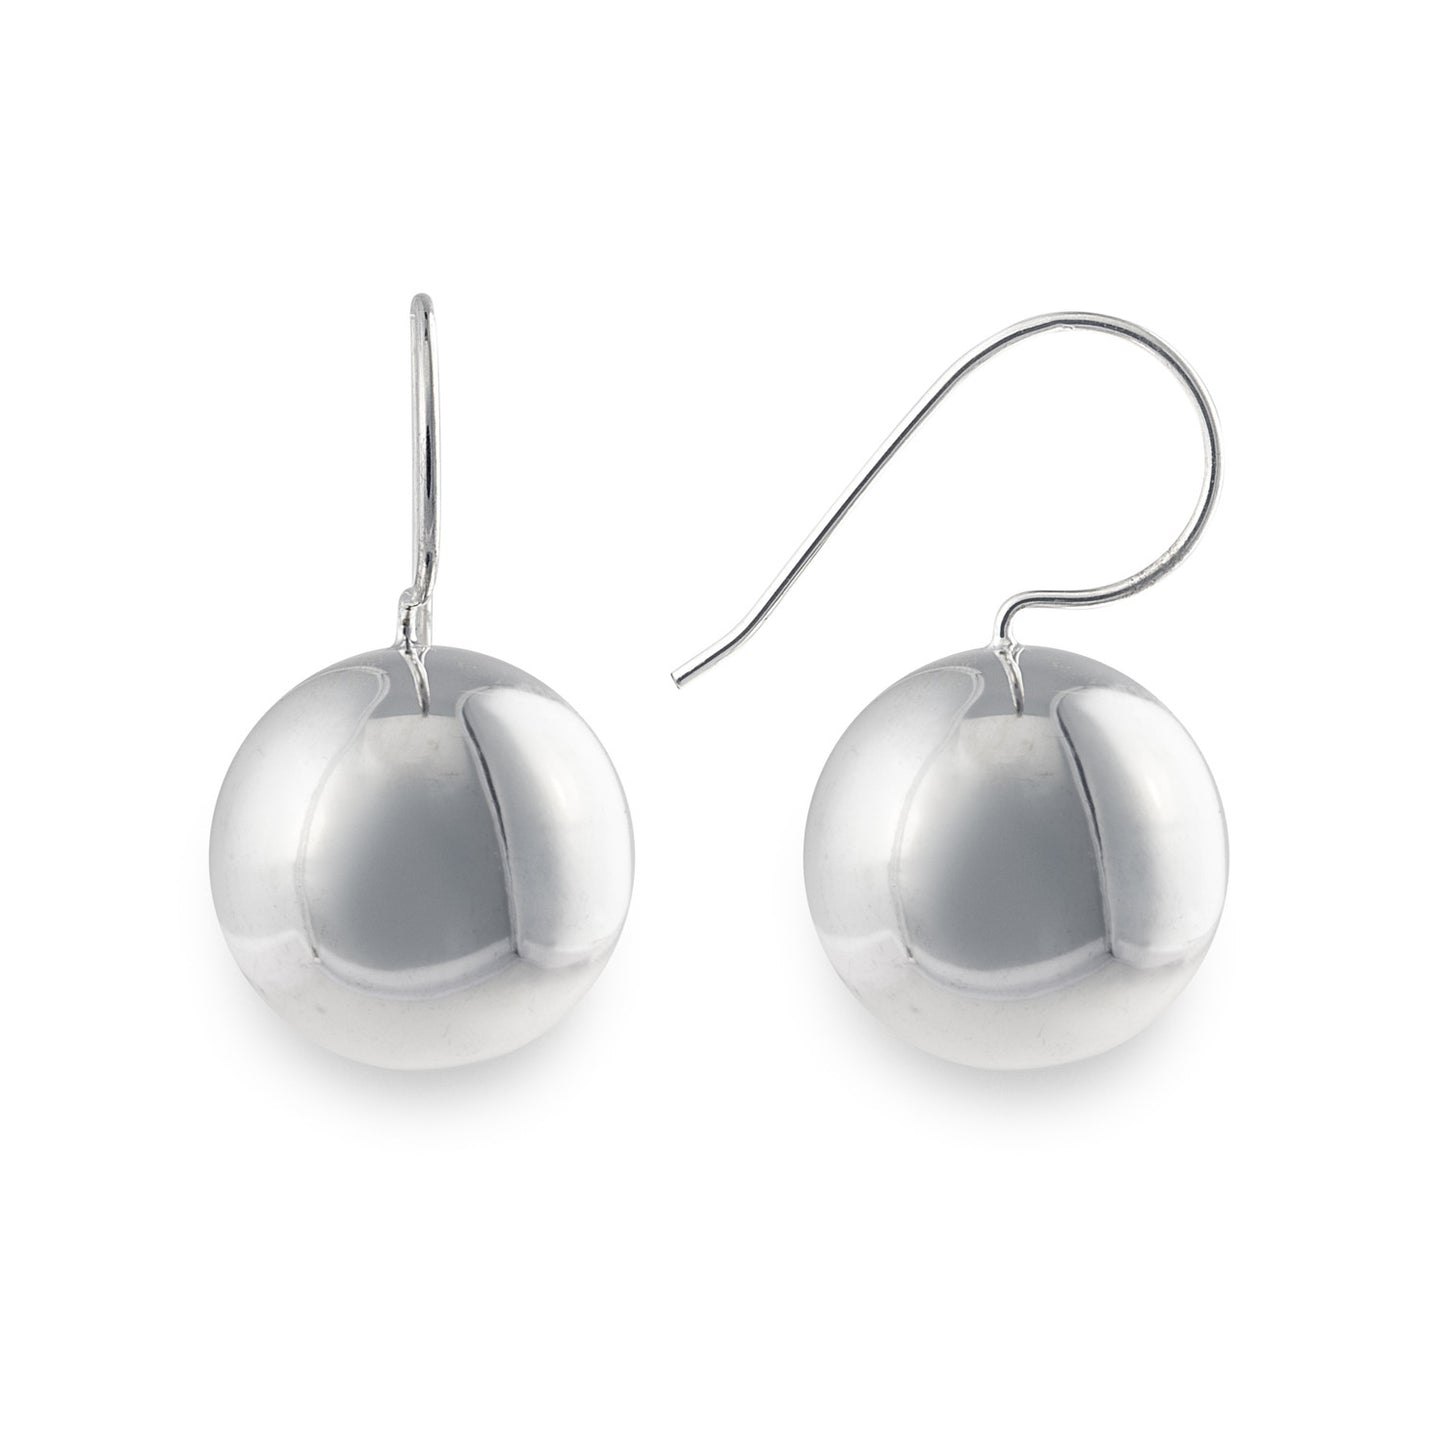 The Grand Villa Drop Earrings feature extra large balls in 925 sterling silver. Size: 18mm ball diameter. Worldwide Shipping. Jewellery by Bellagio & Co